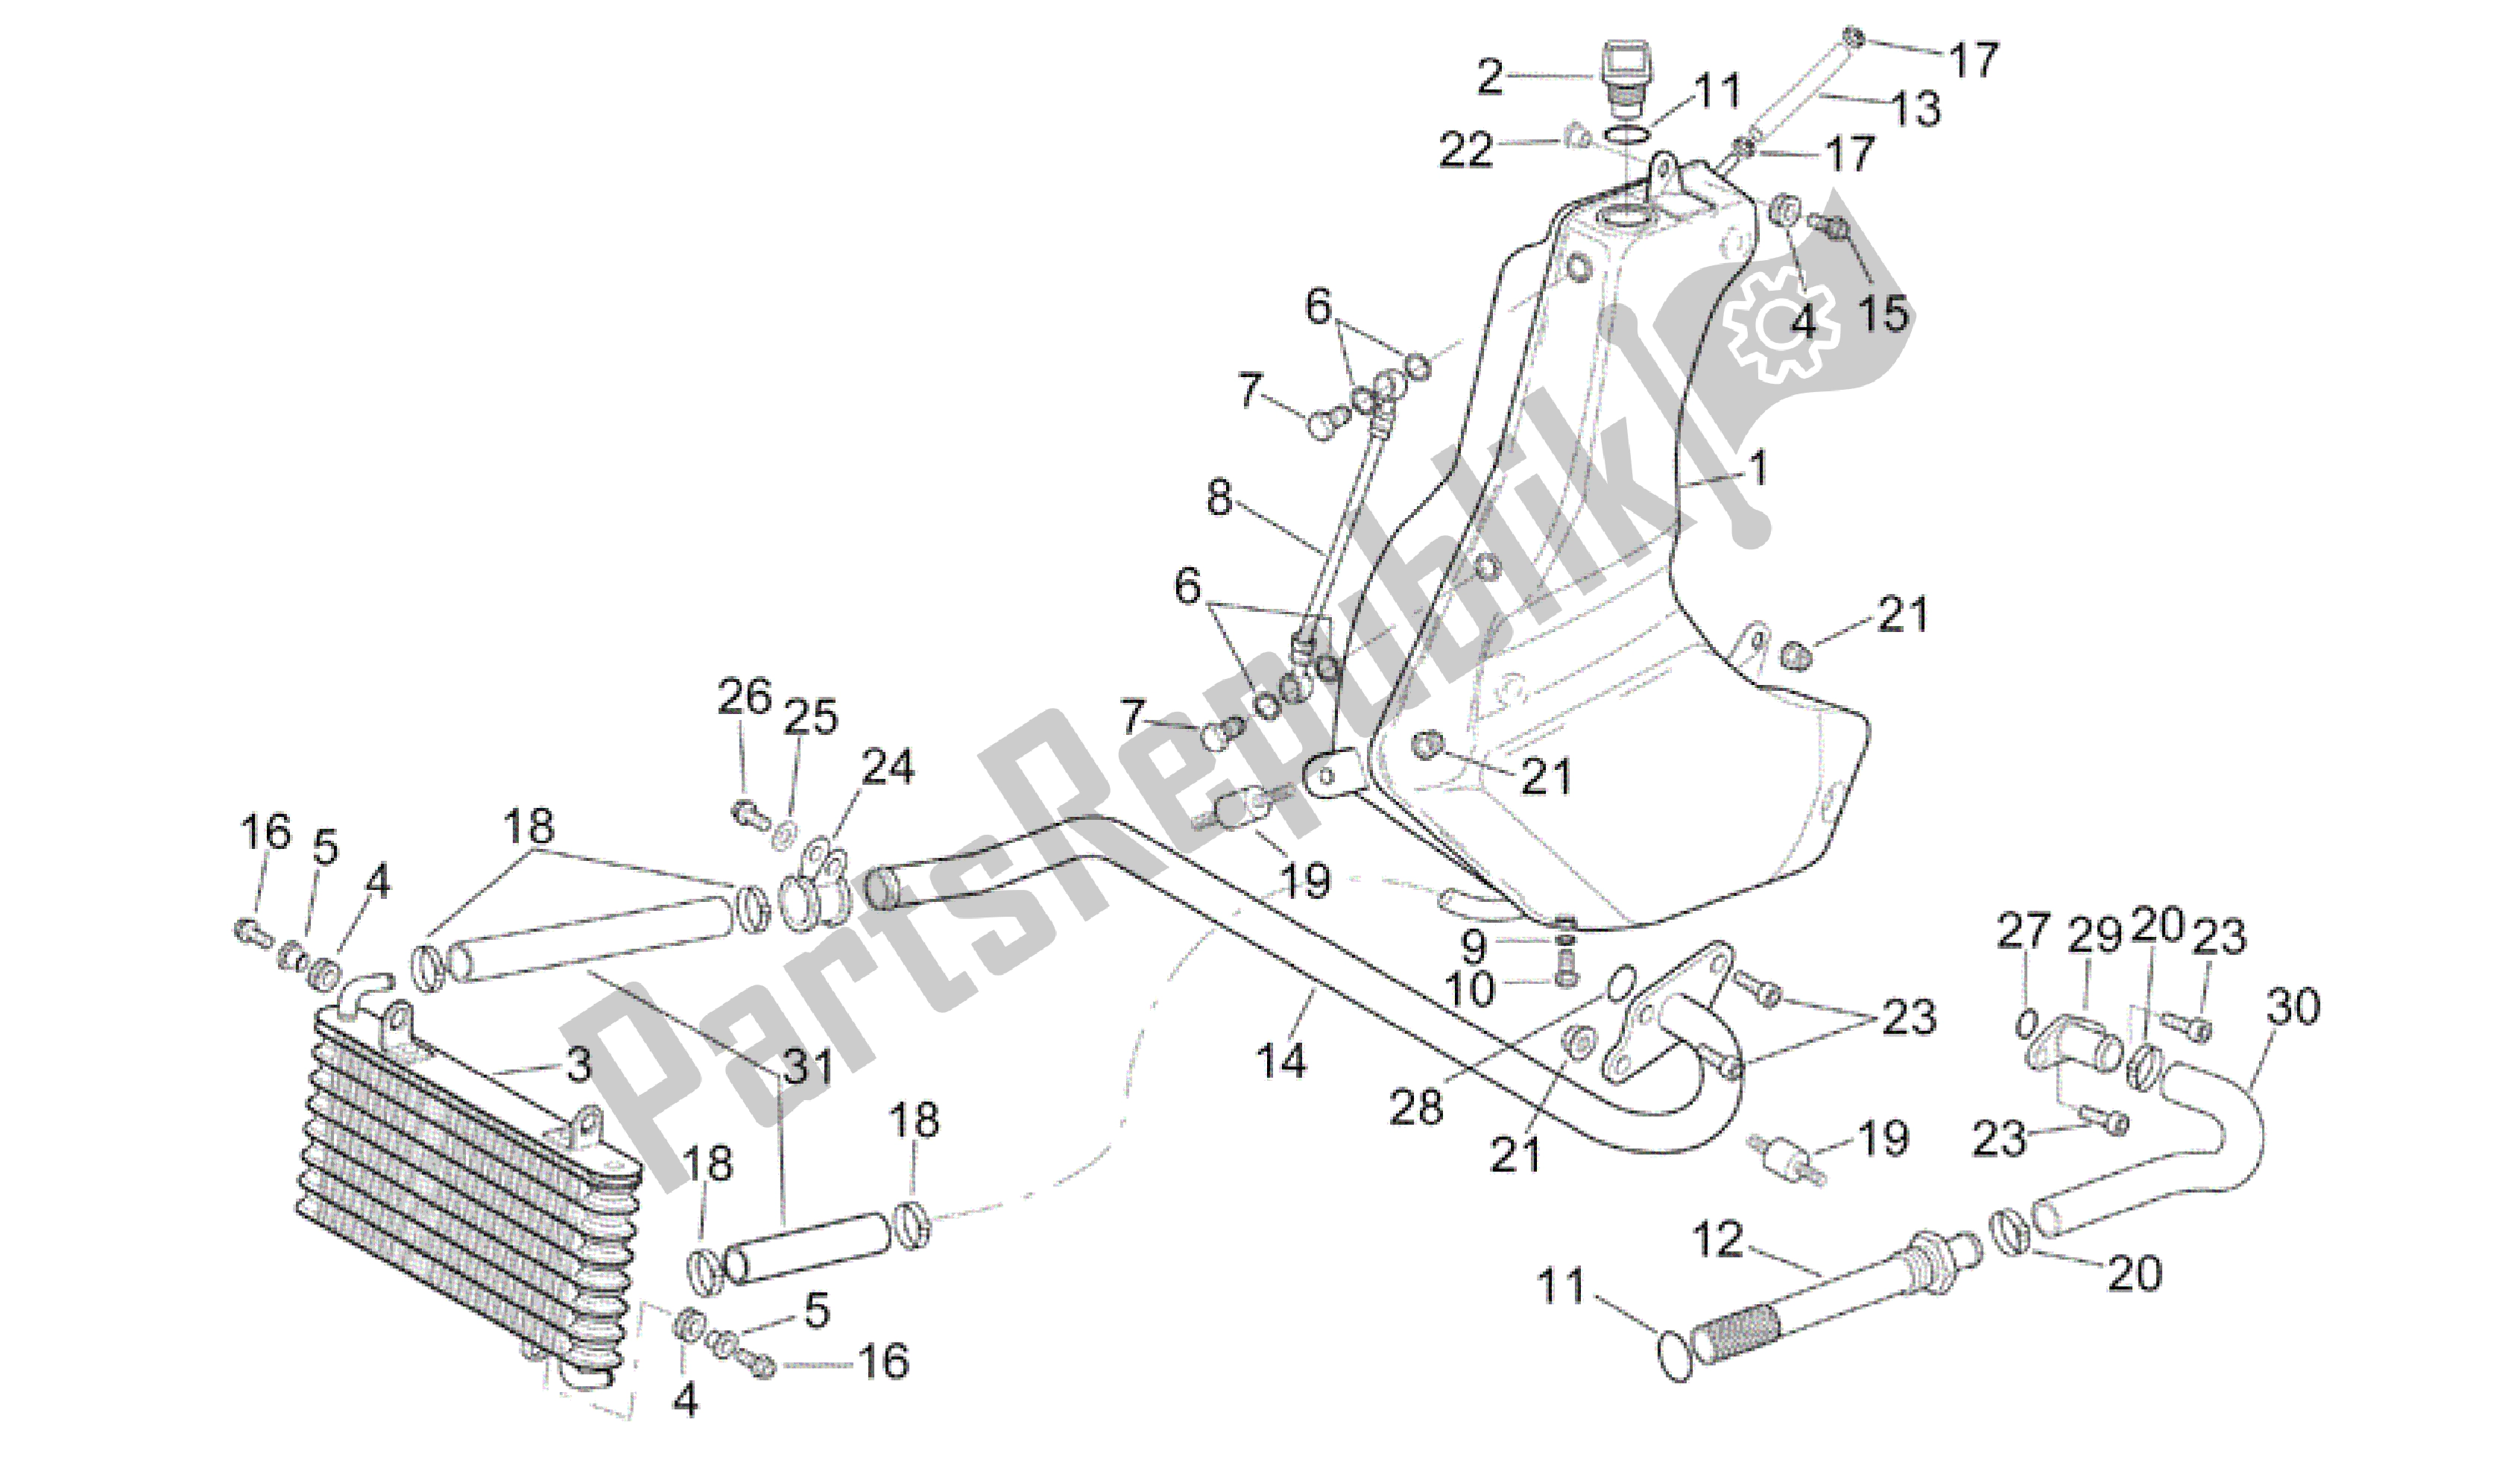 All parts for the Oil Tank of the Aprilia RSV Mille 3963 1000 2003